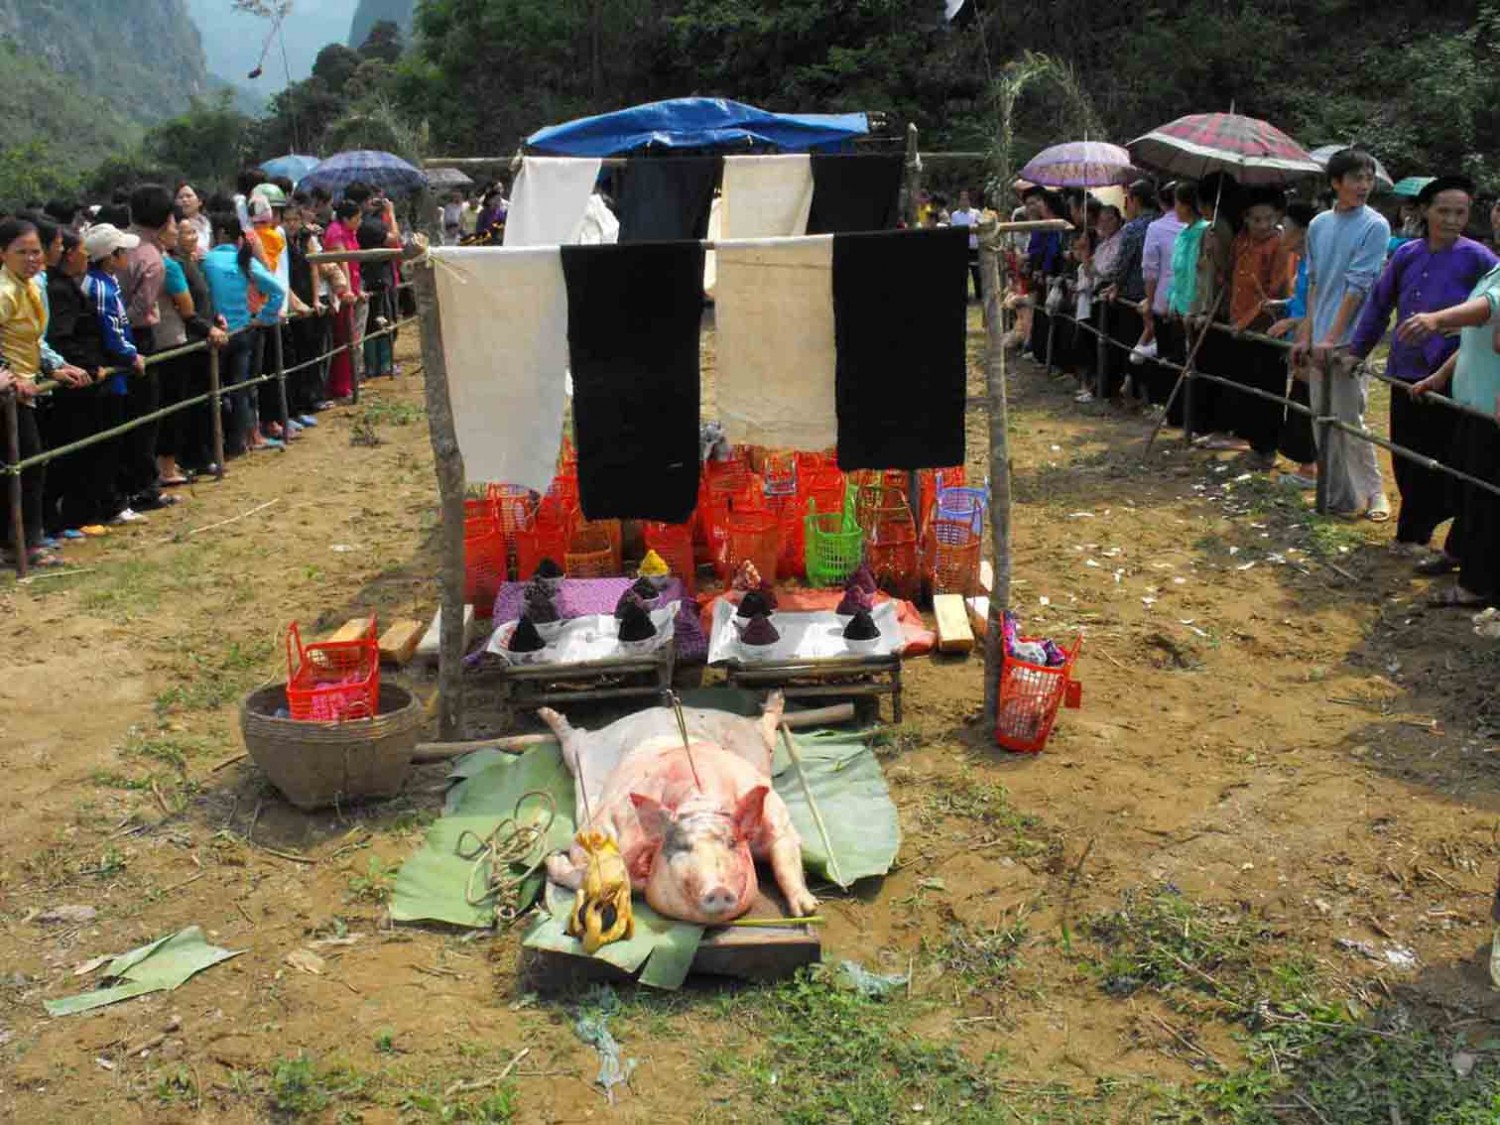 Interesting features of Nang Hai (Moon’s mother) festival in Chu Lang, Kim Dong commine village, Thach An district, Cao Bang